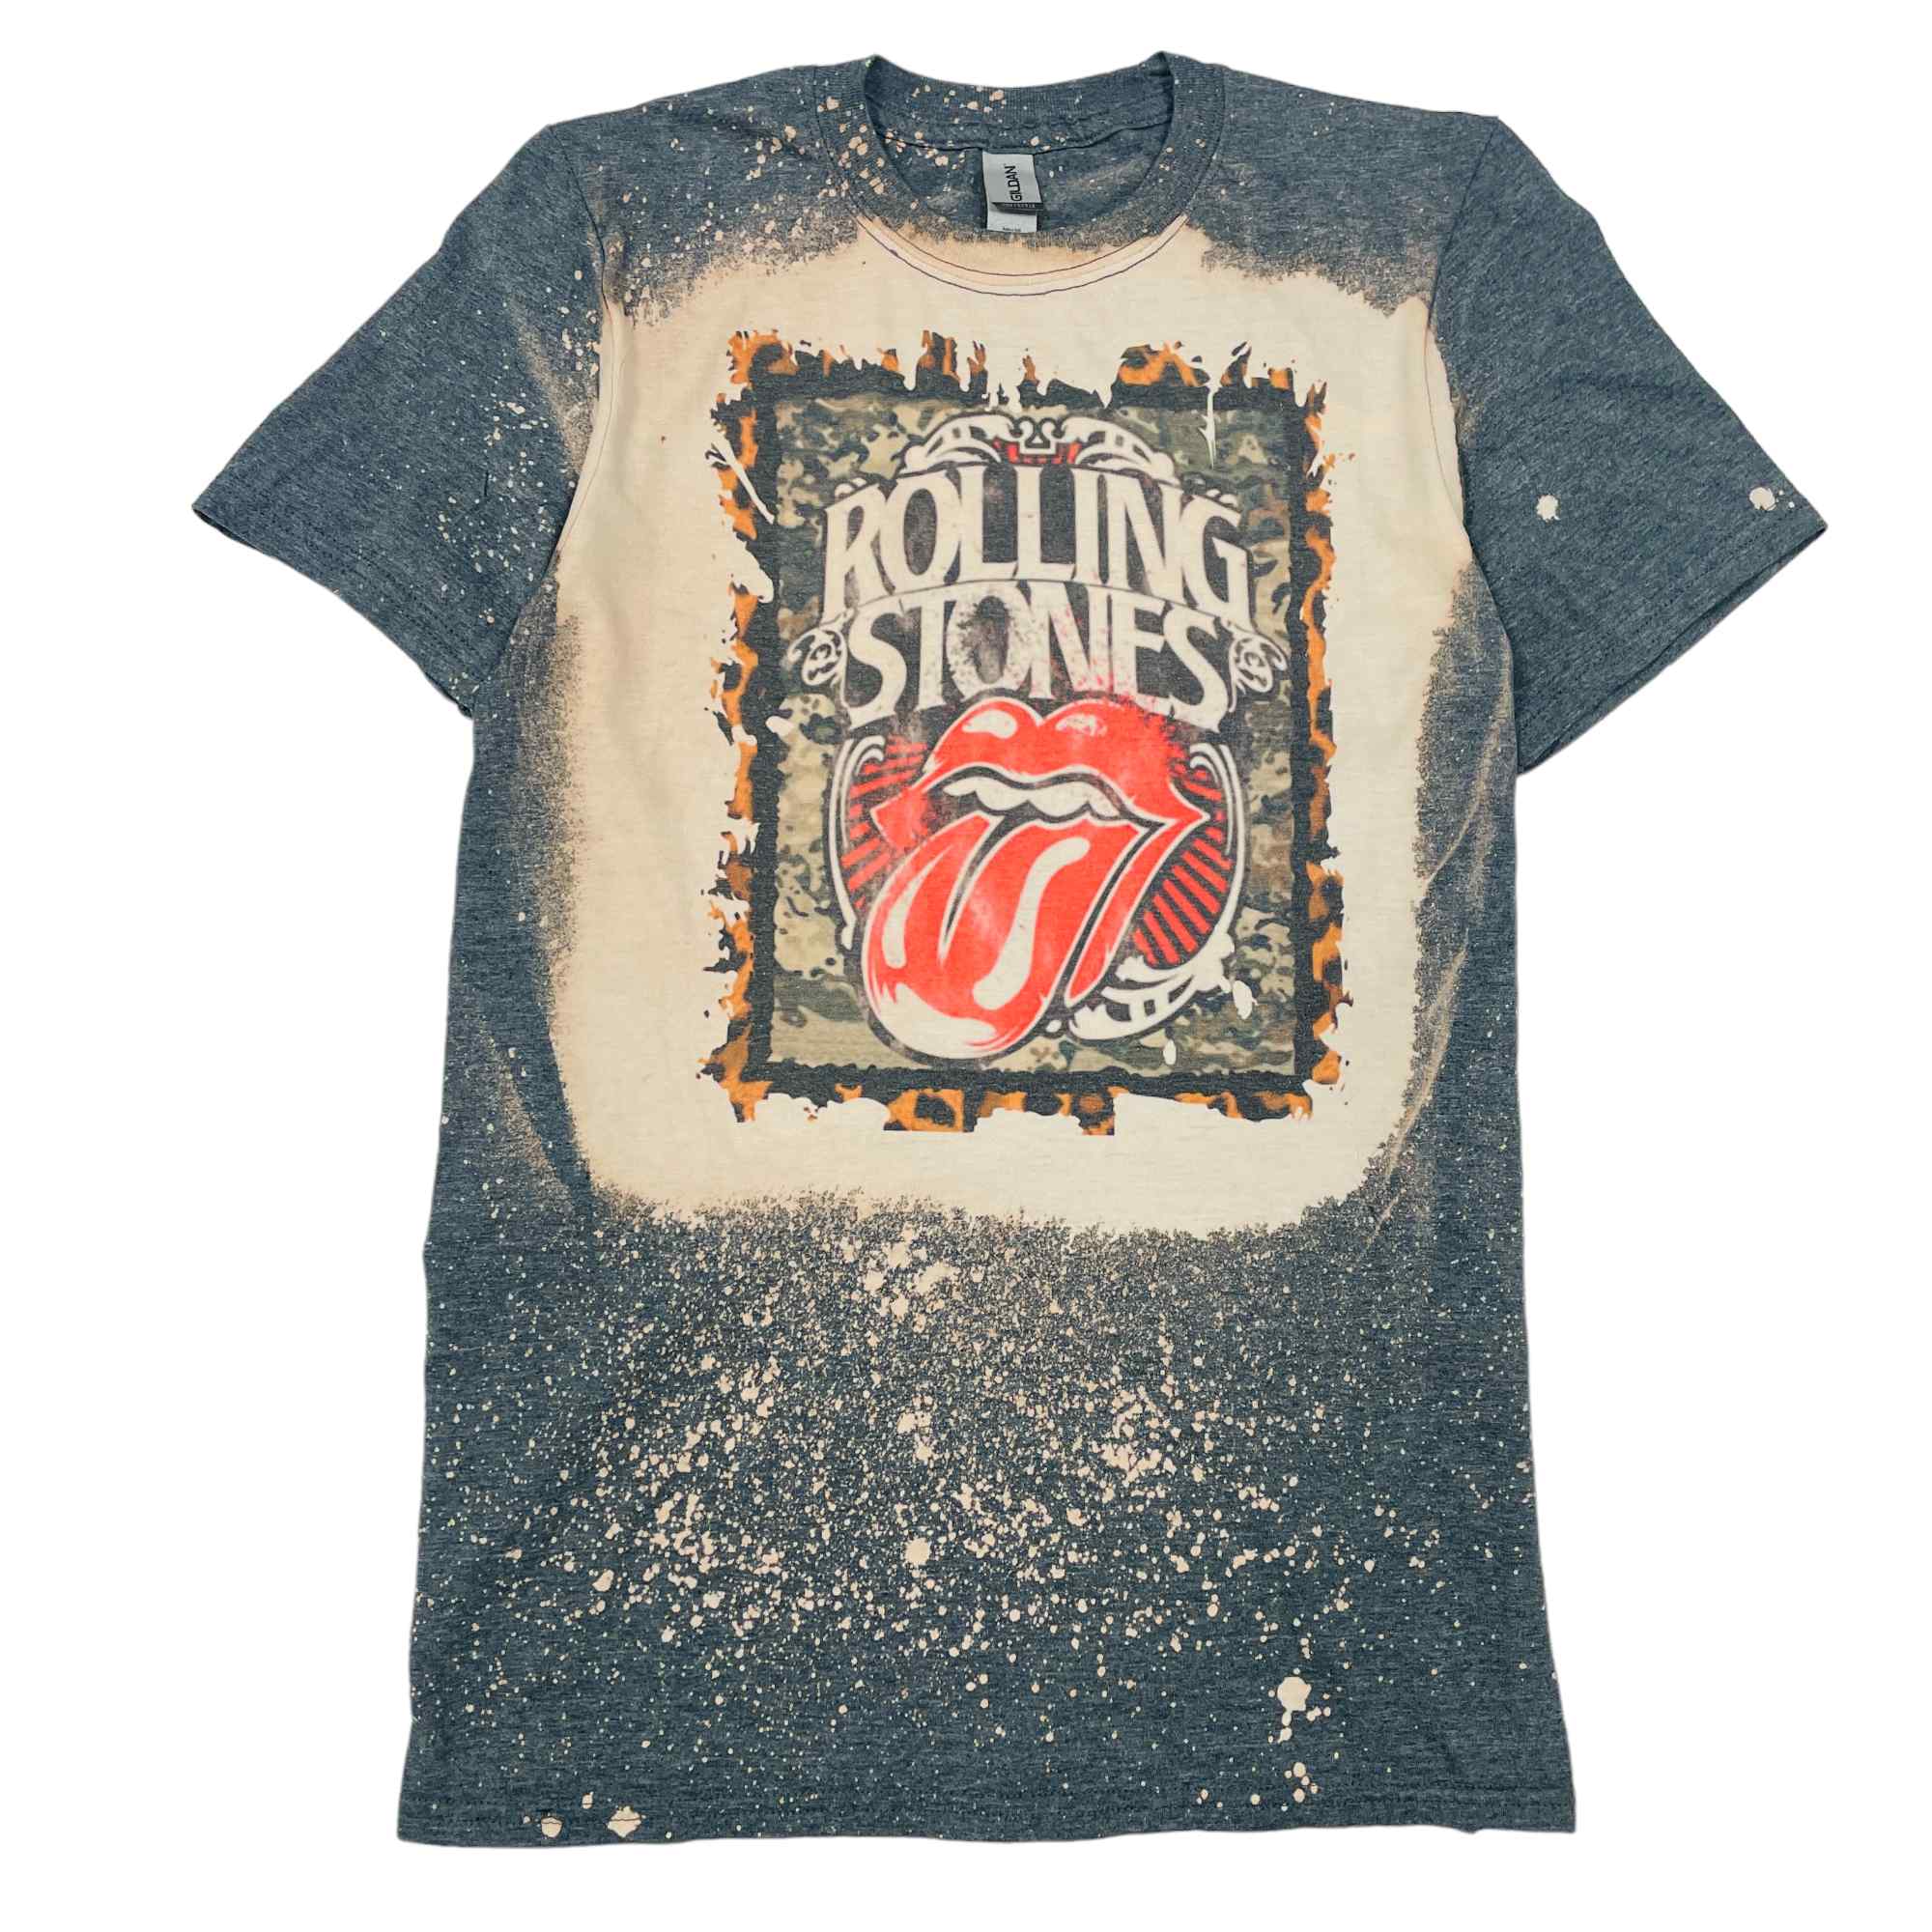 The Rolling Stones Graphic T-Shirt - Small